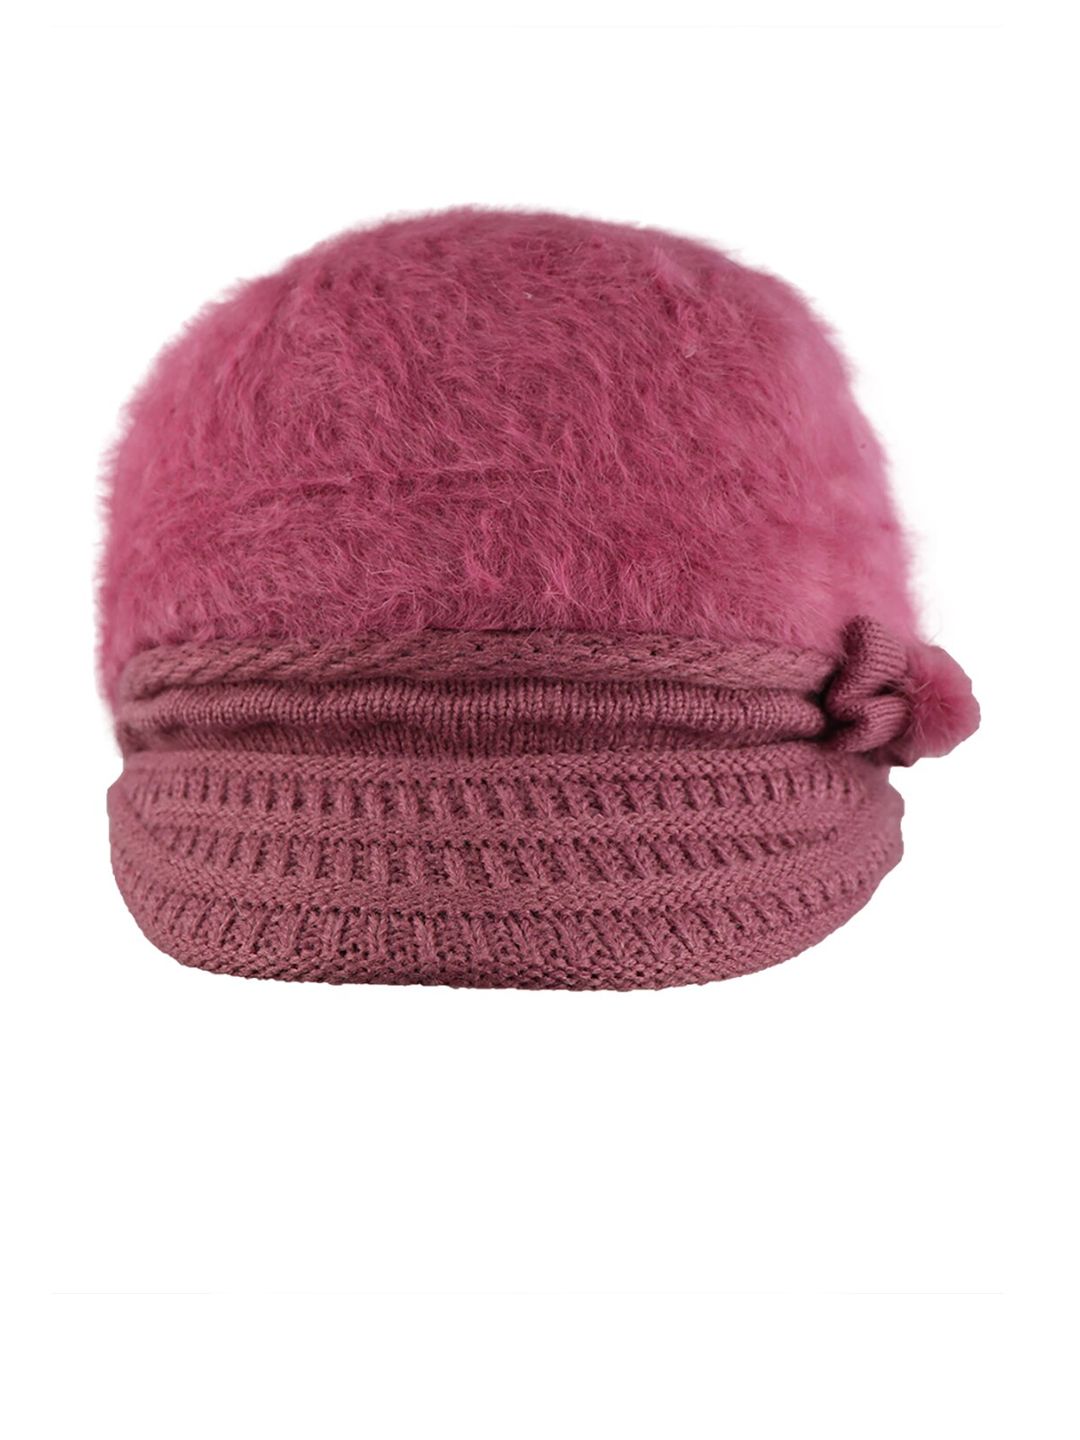 iSWEVEN Unisex Pink Solid Woven Expandable Visor Cap Price in India